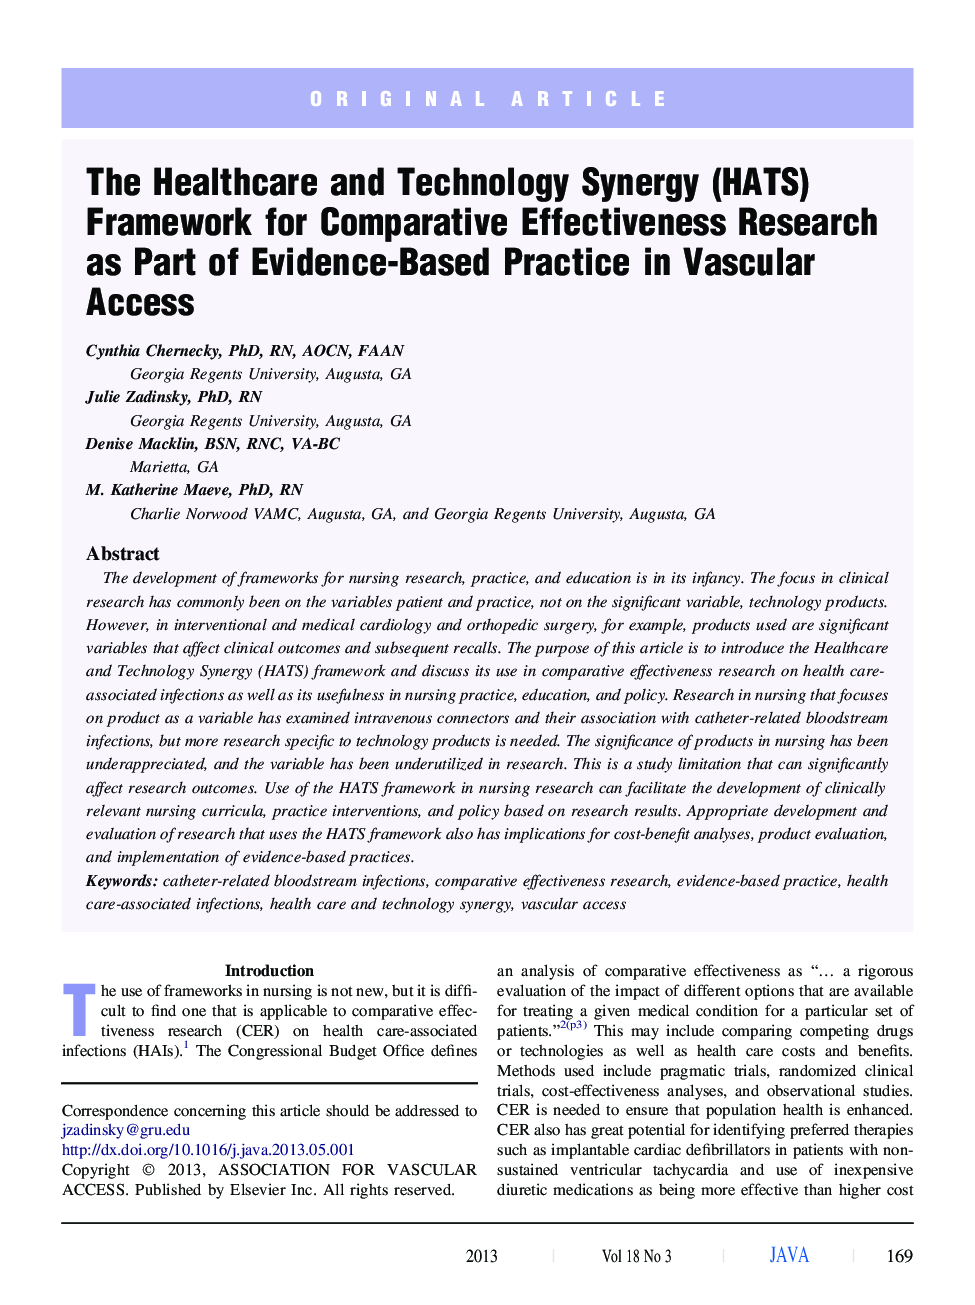 The Healthcare and Technology Synergy (HATS) Framework for Comparative Effectiveness Research as Part of Evidence-Based Practice in Vascular Access